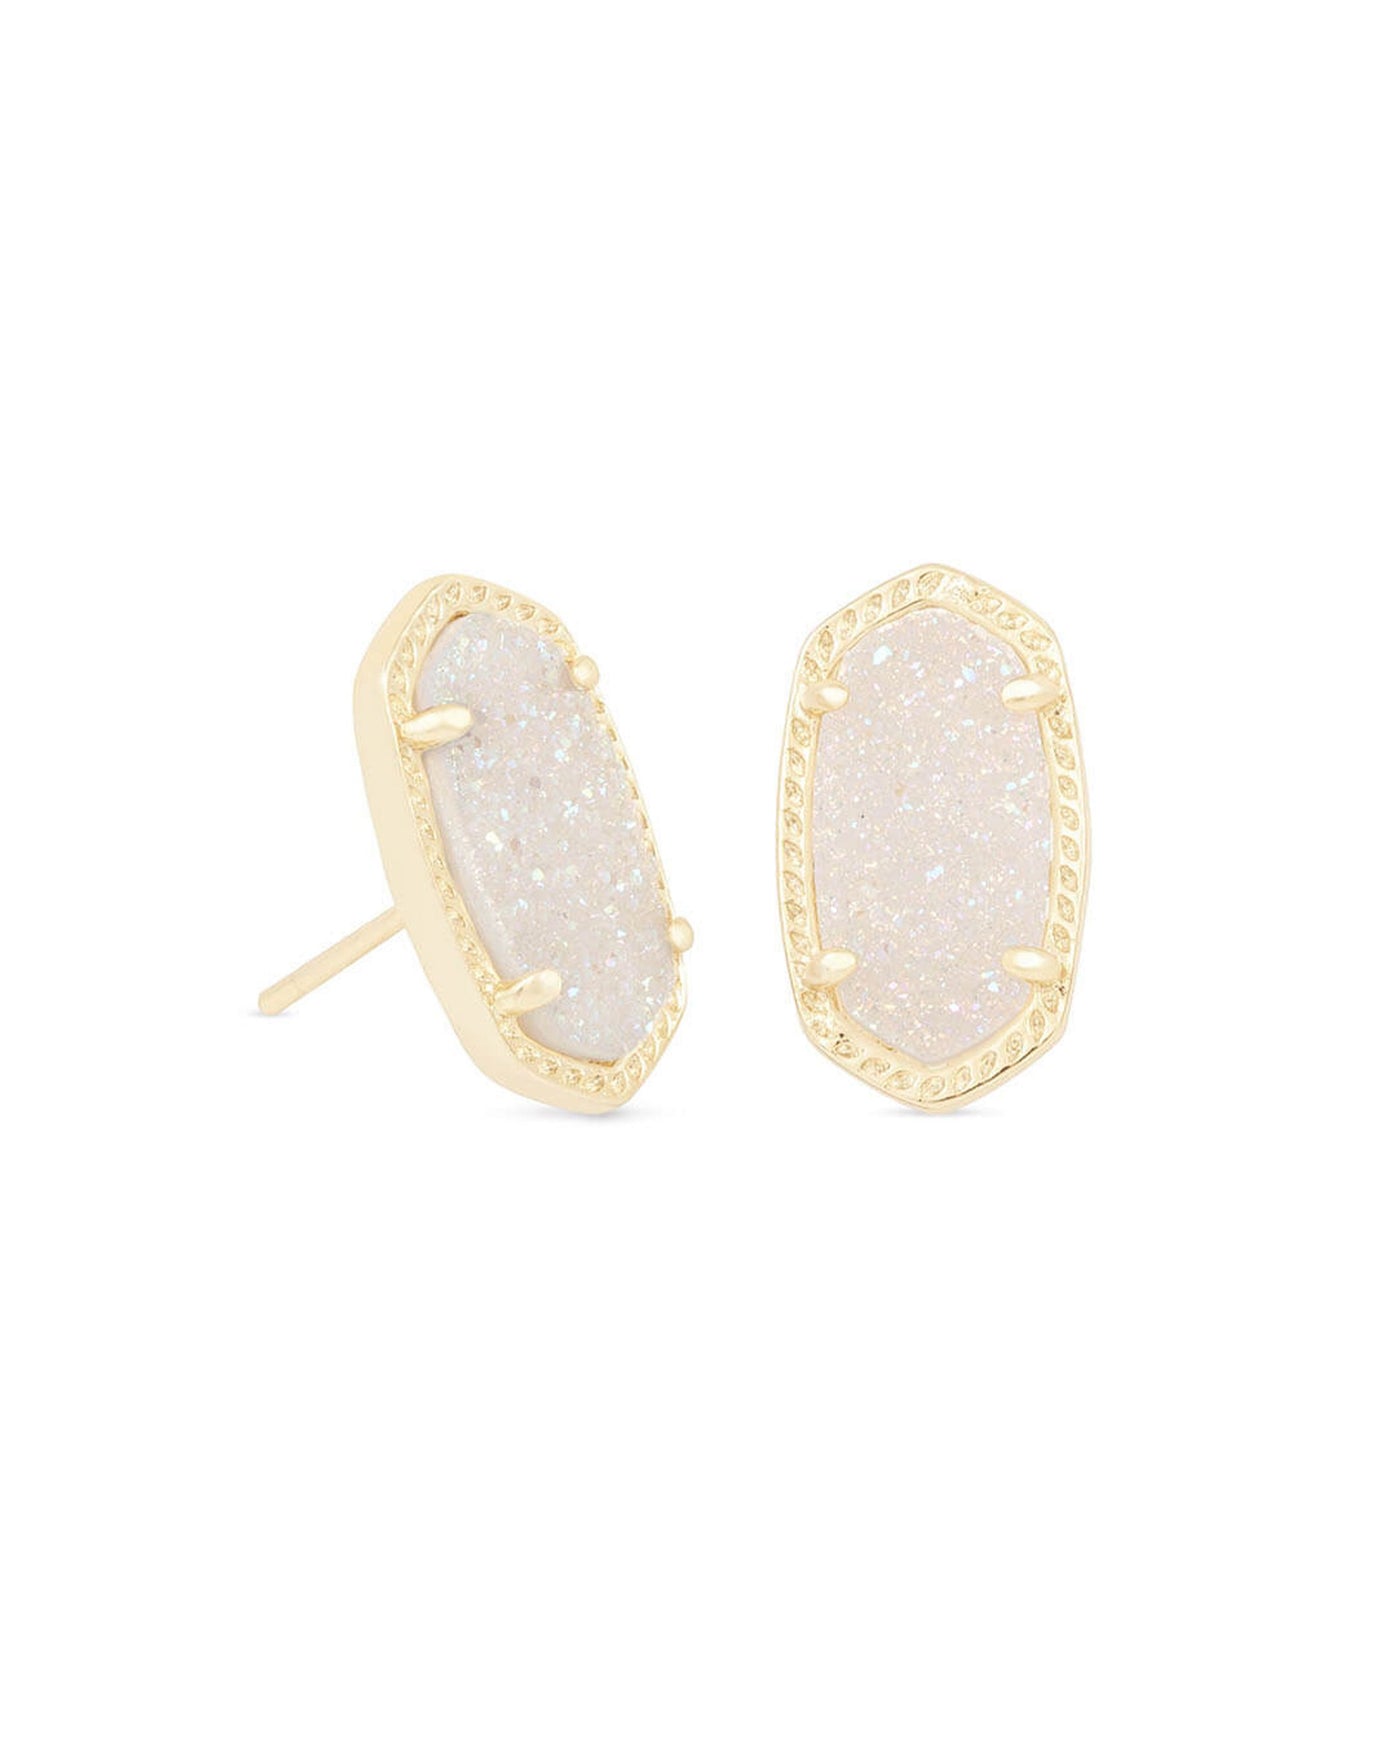 Kendra Scott Emilie Stud Earrings Gold Iridescent Drusy-Earrings-Kendra Scott-Market Street Nest, Fashionable Clothing, Shoes and Home Décor Located in Mabank, TX